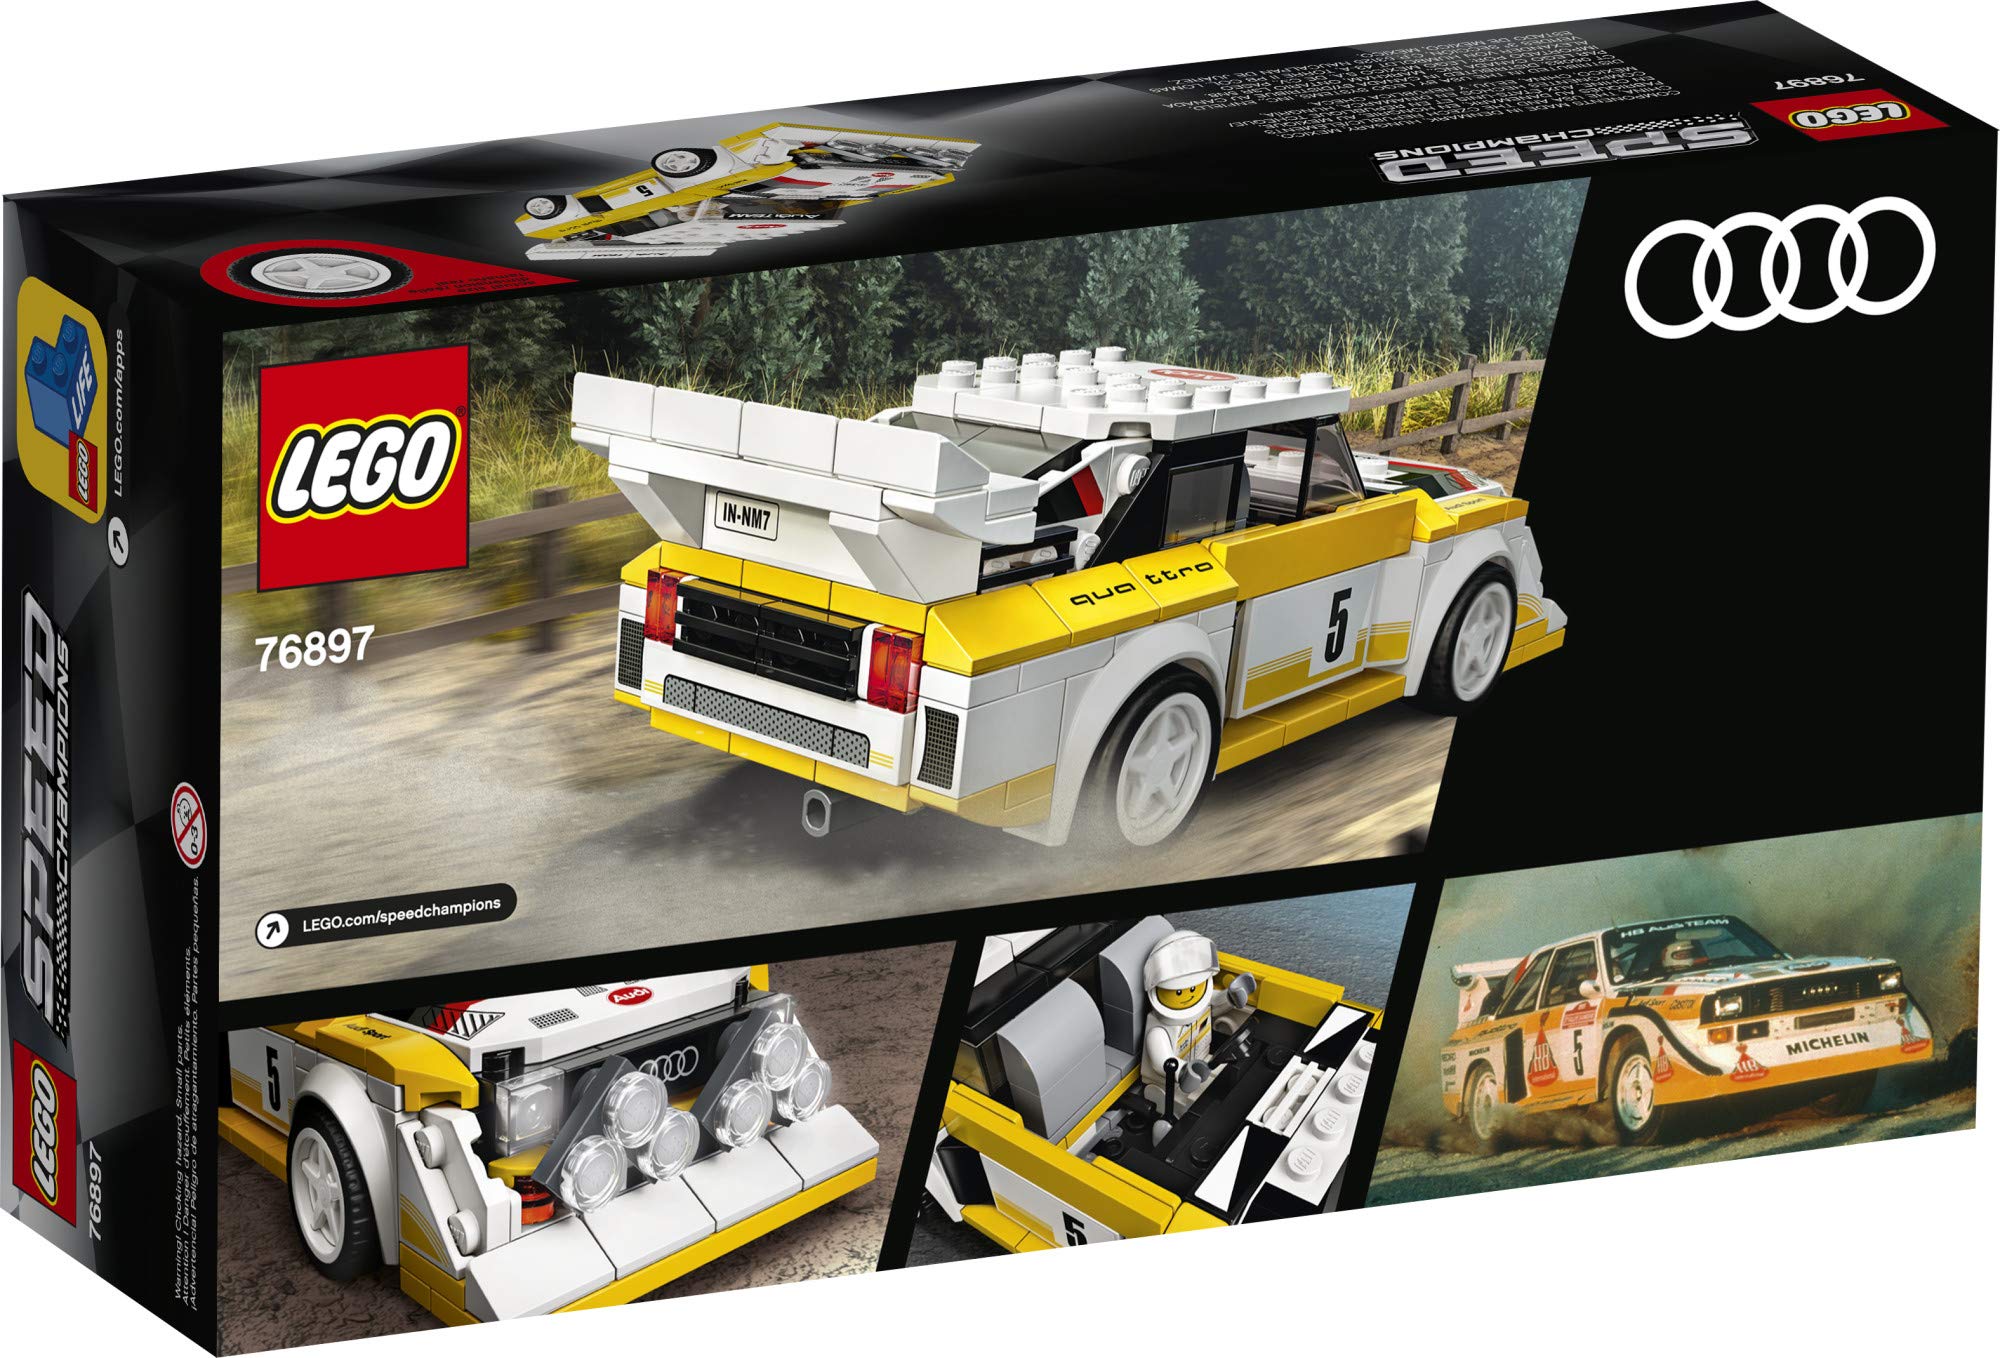 LEGO Speed Champions 1985 Audi Sport Quattro S1 76897 Toy Cars for Kids Building Kit Featuring Driver Minifigure (250 Pieces) (Like New, Open Box)